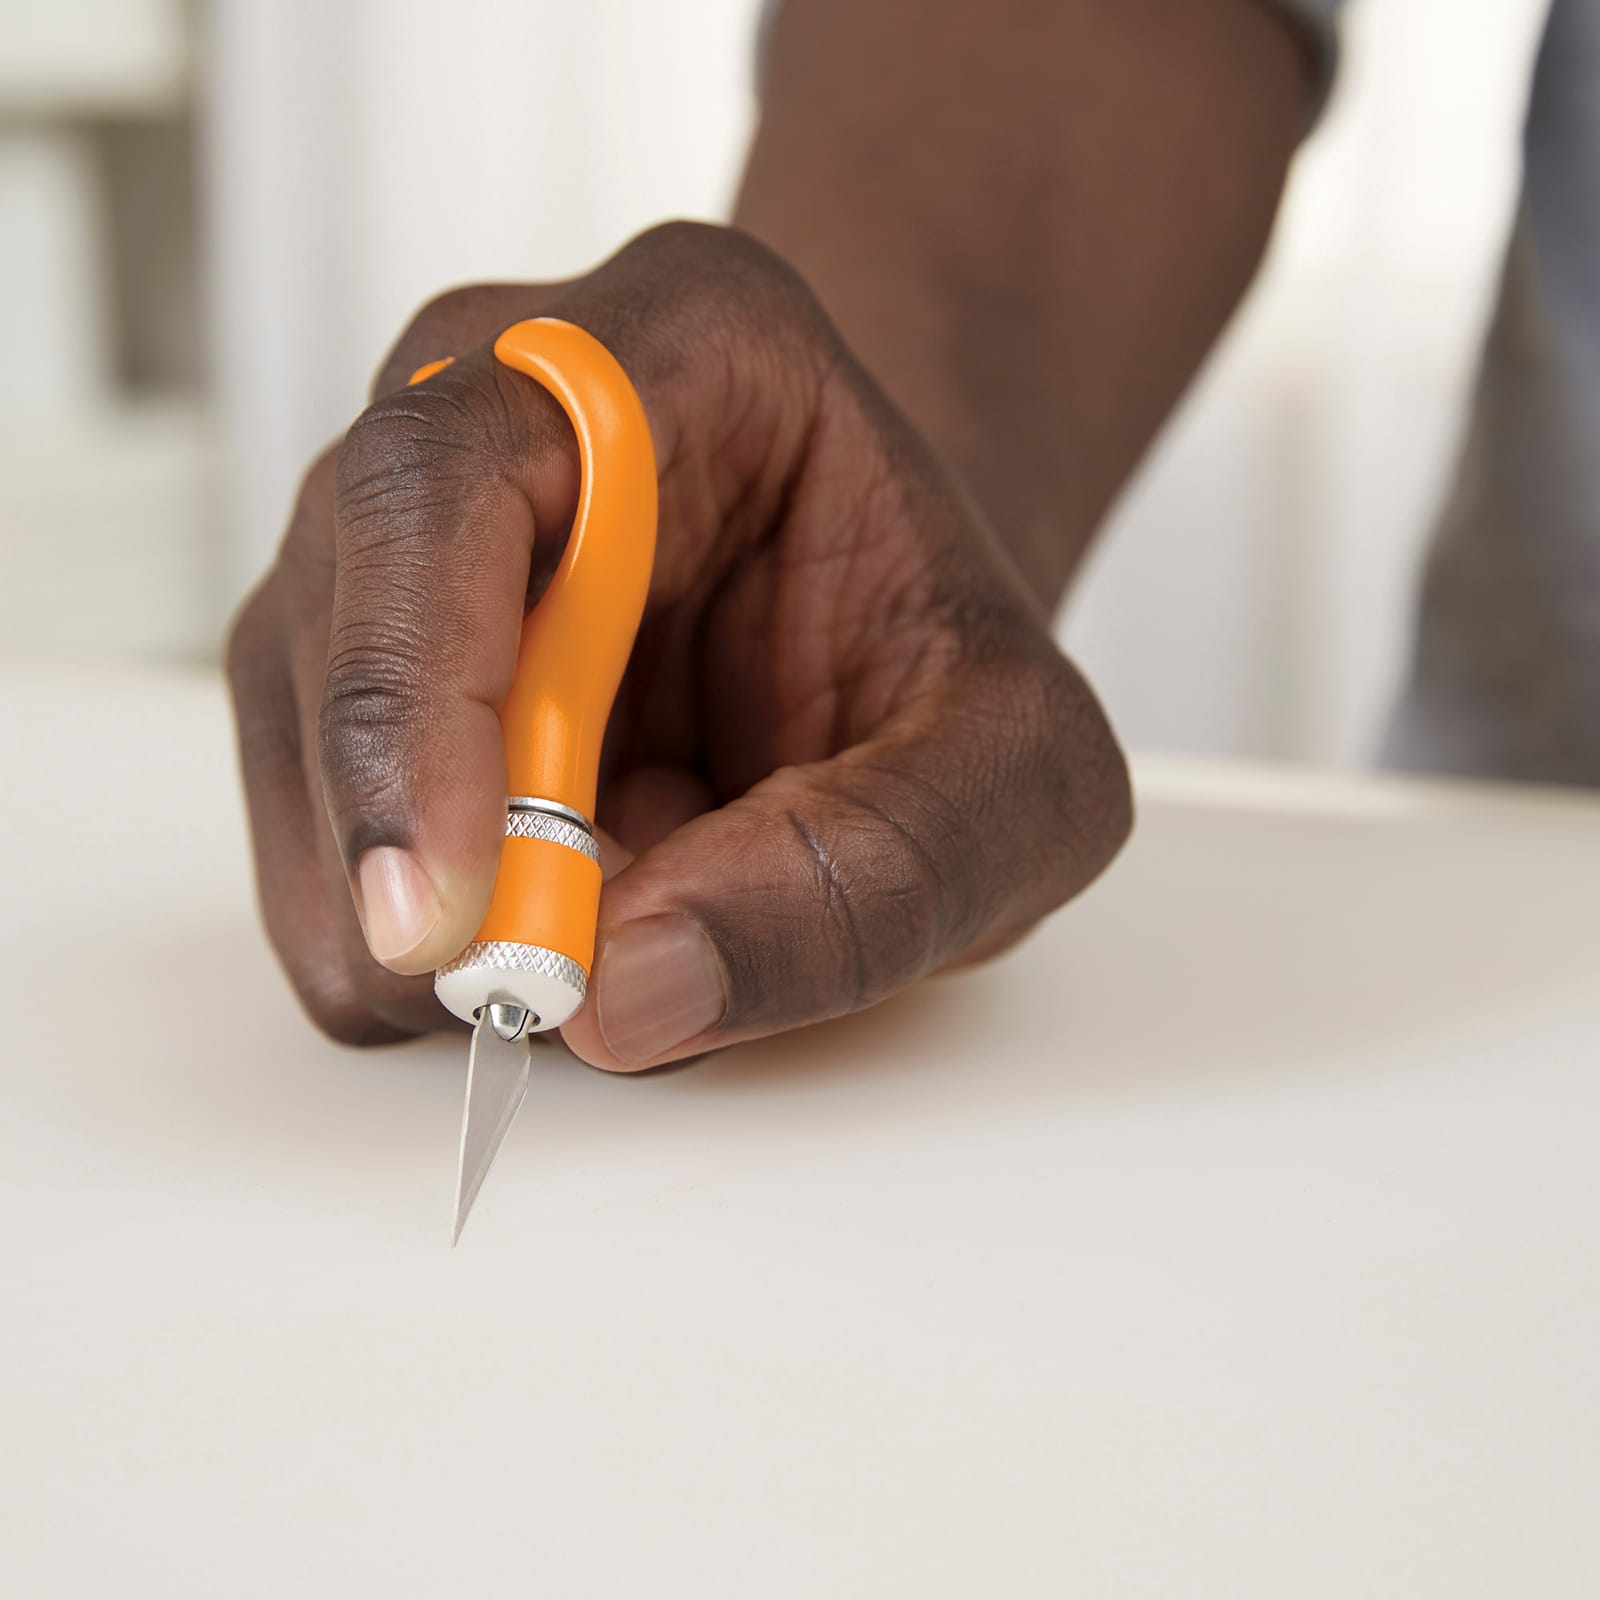 Fiskars Fingertip Tool Designed To Maximize Your Cutting Precision FISK1352 